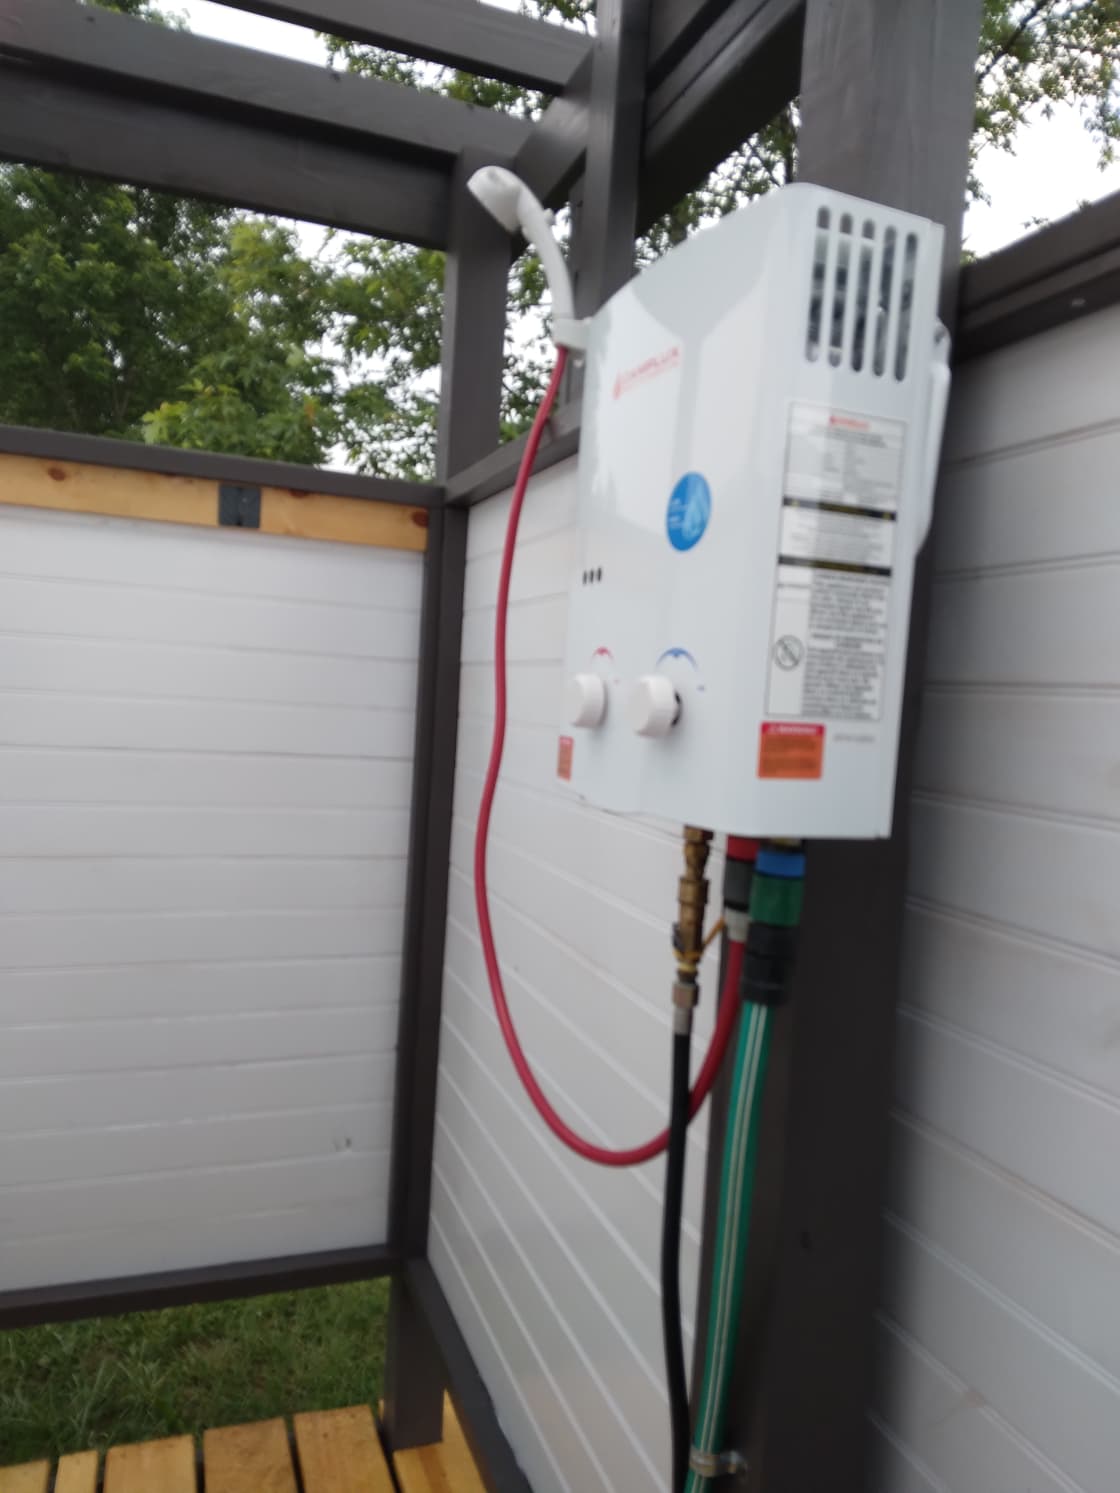 The easy-to-use Camplux on-demand propane water heater is a big hit.  It works great.